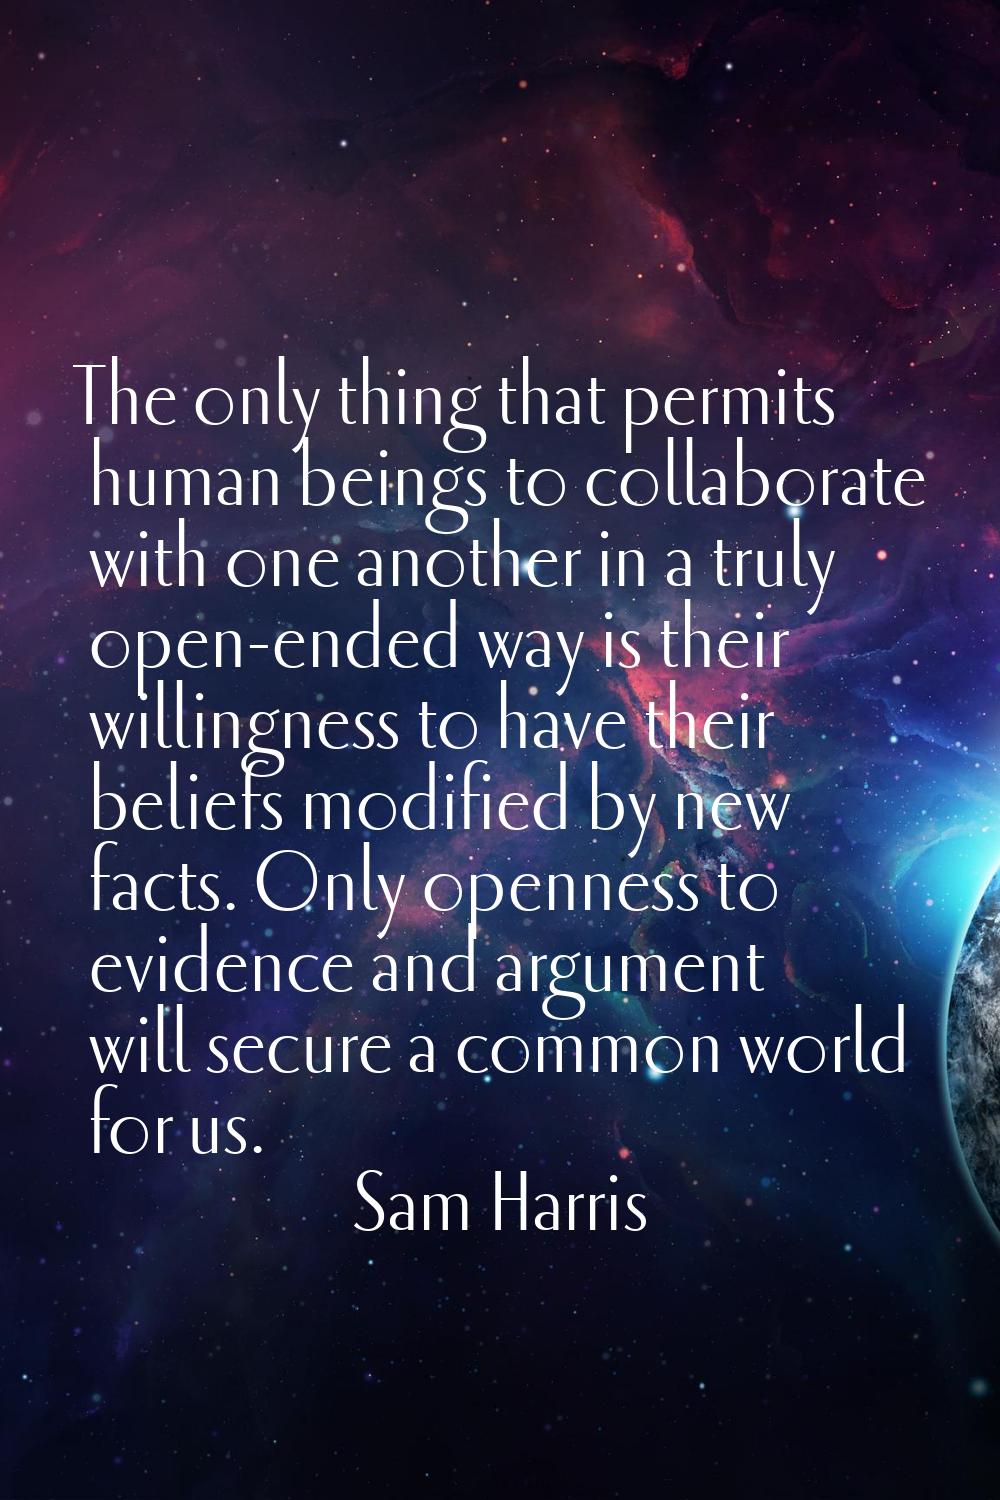 The only thing that permits human beings to collaborate with one another in a truly open-ended way 